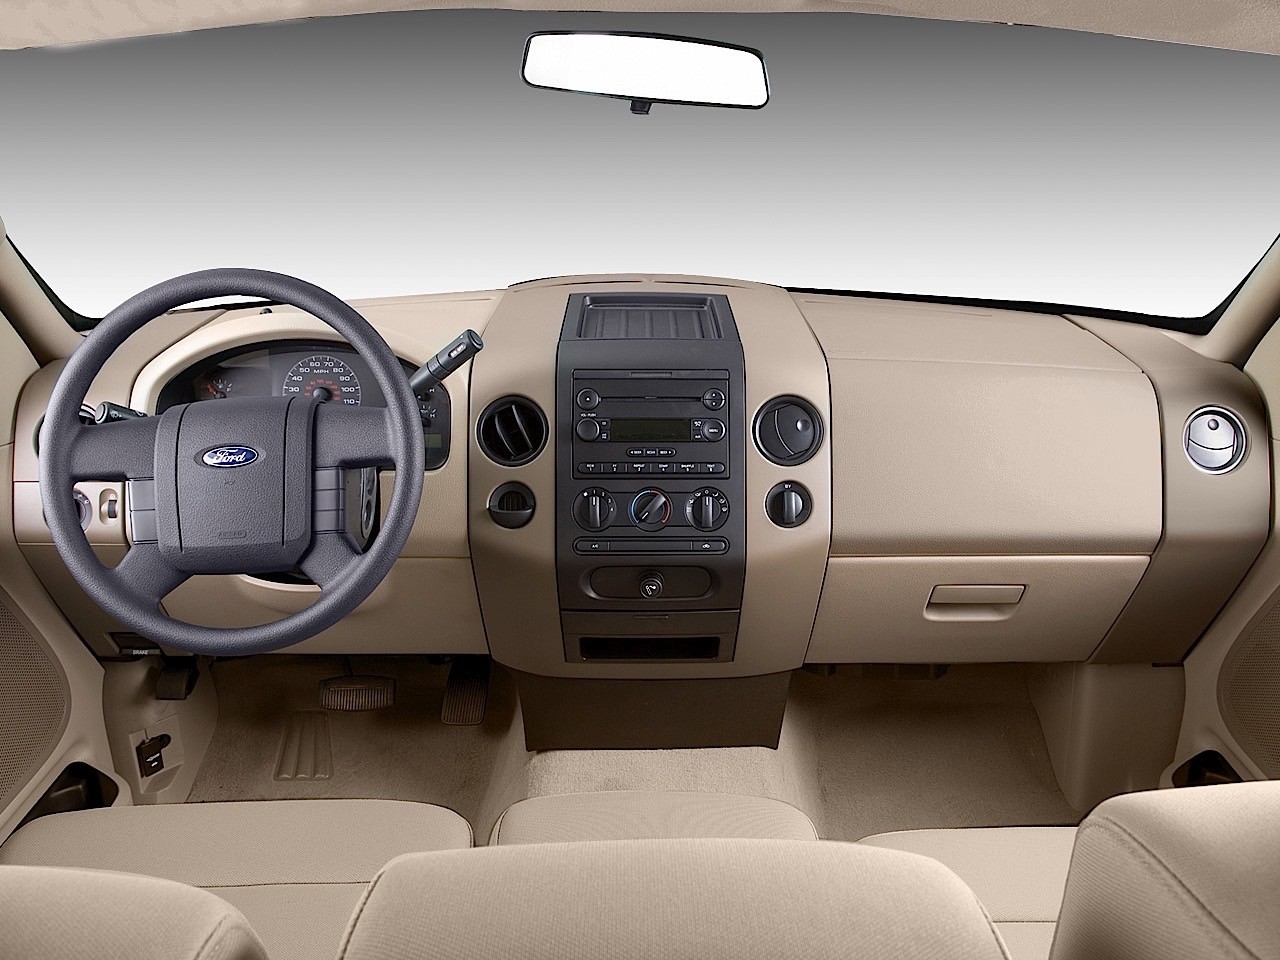 FORD F-150 Regular Cab specs - 2009, 2010, 2011, 2012 - autoevolution 2006 F150 Interior Lights Come On While Driving